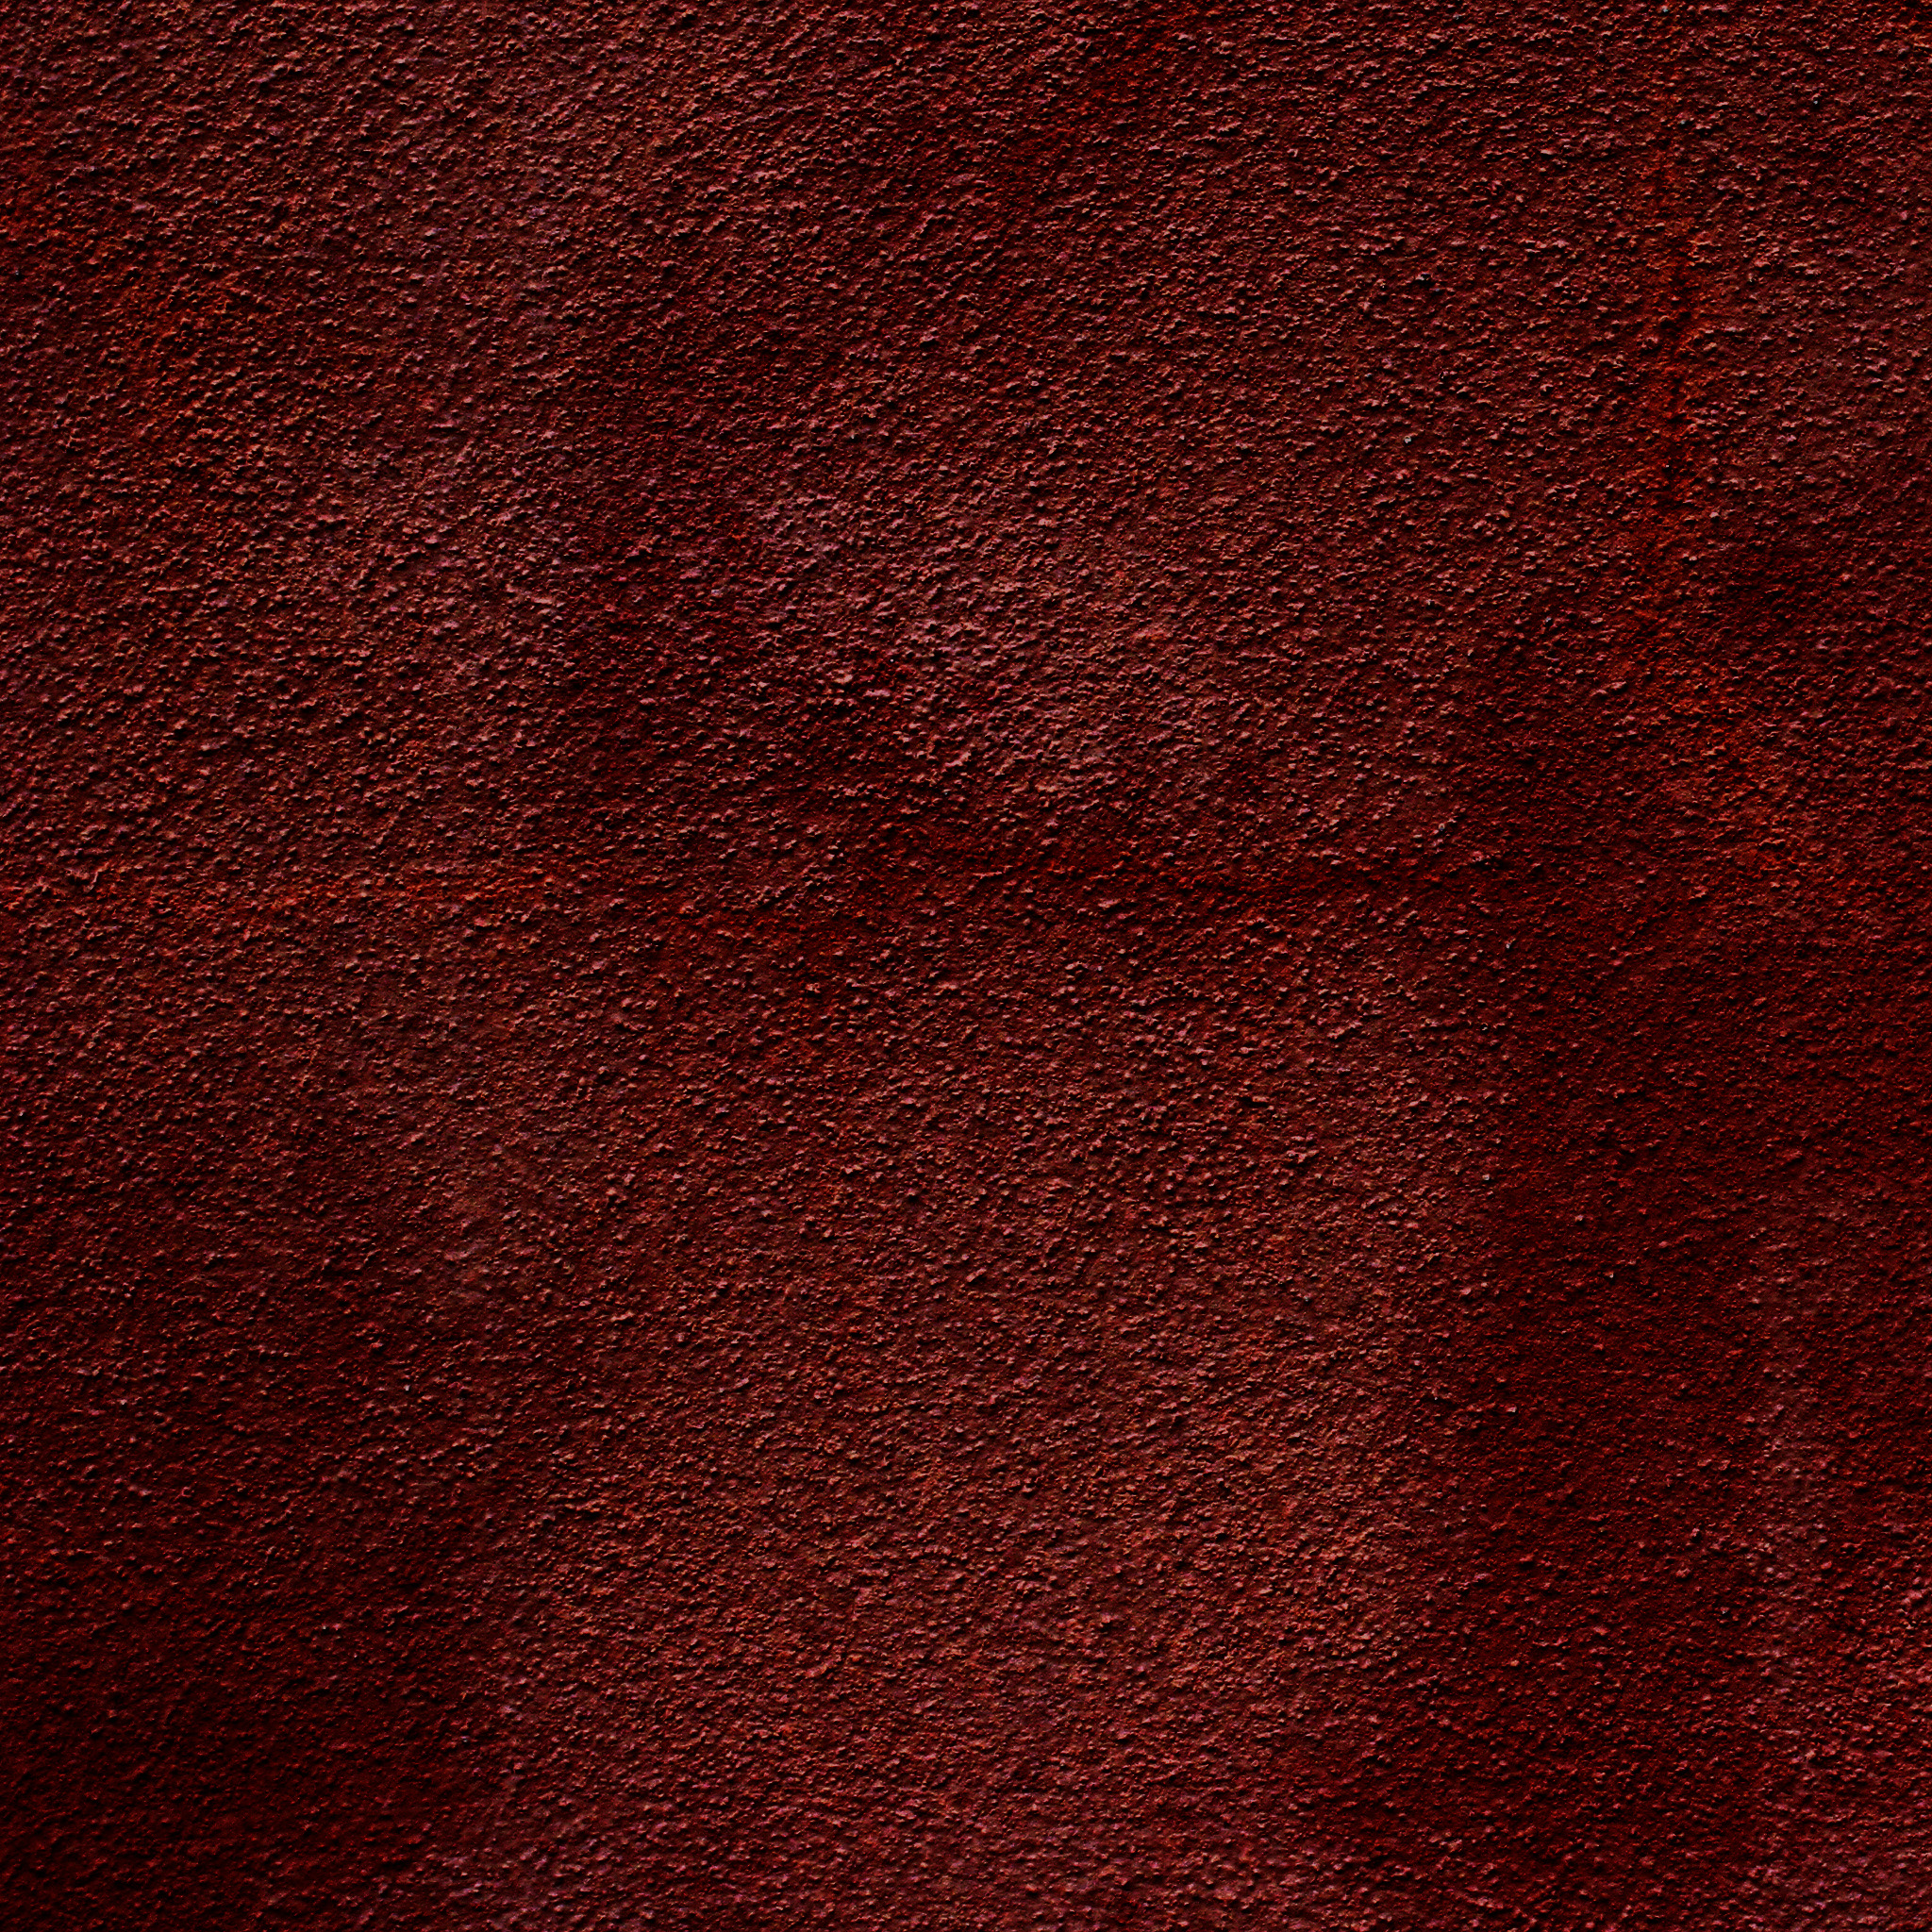 Red Bordeaux Wallpaper And Background Image